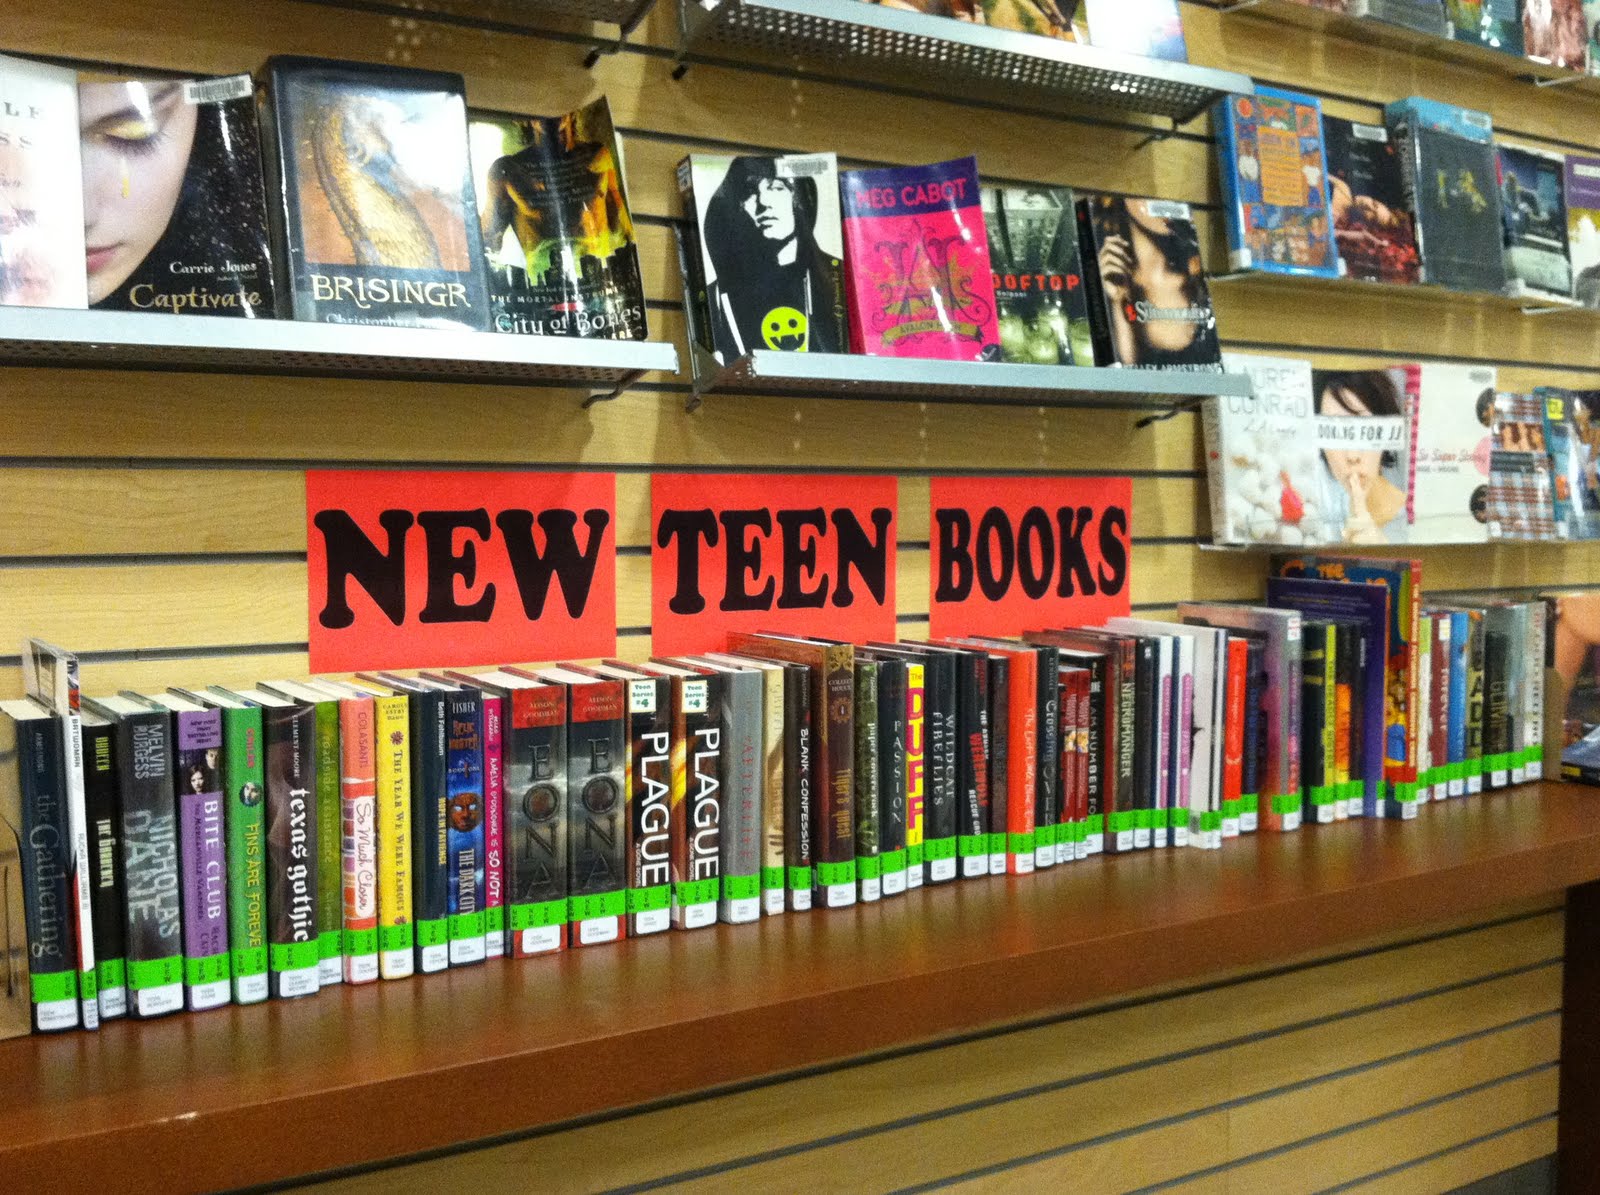 You can have this book. Books for teens.